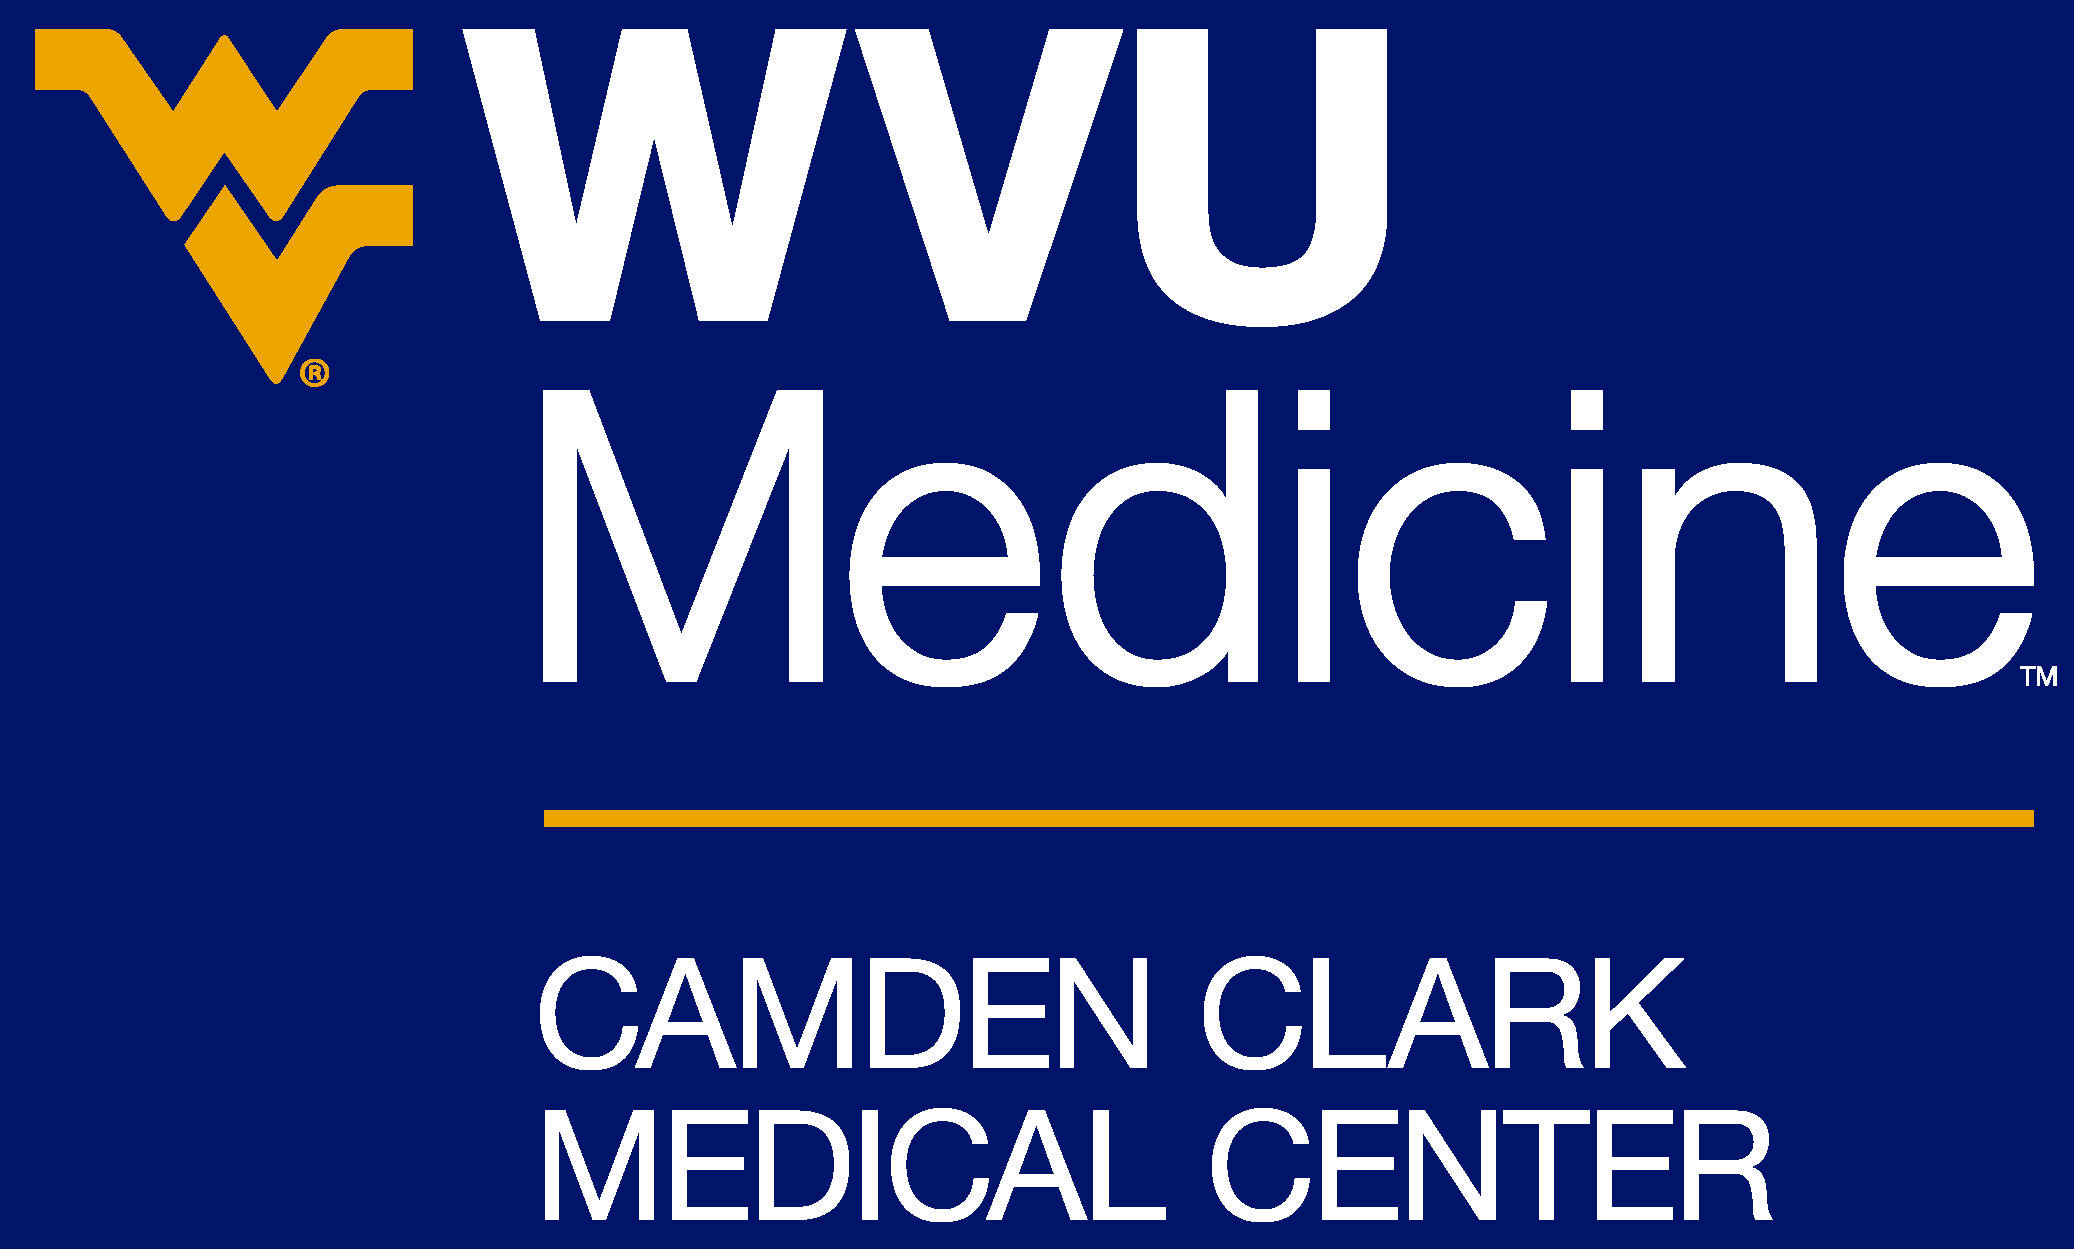 WVUMedicineCAMDEN_STACKED124 and white_blue background-01.jpg